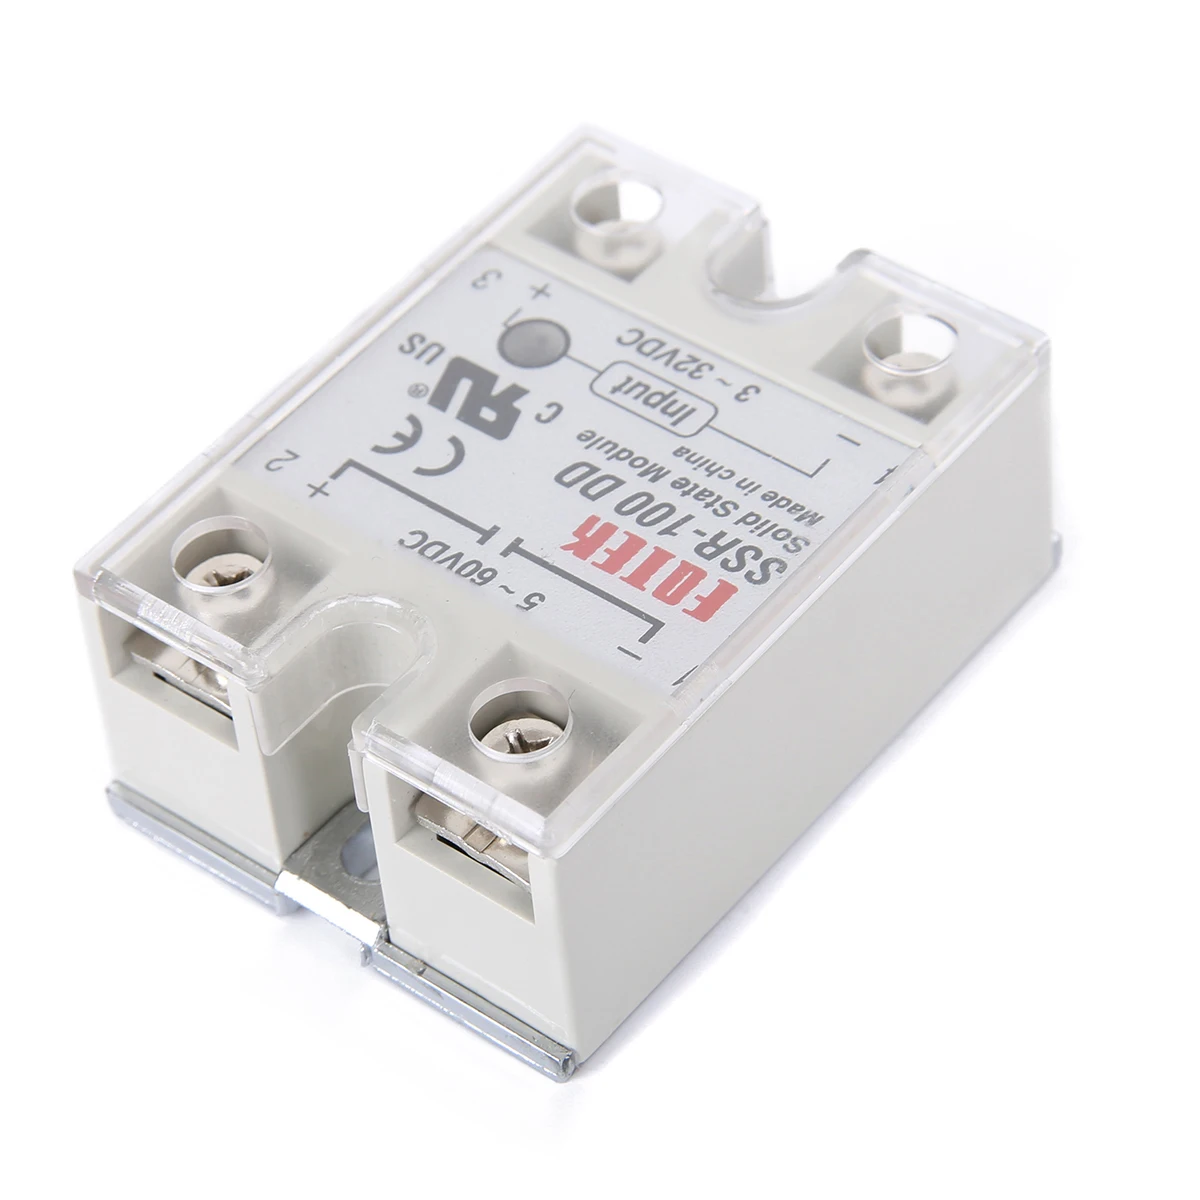 1pc Reliable SSR-100DD Solid State Module Solid-state Relays 100A 3-32V DC/5-60V DC Control 62*45*22mm Mayitr